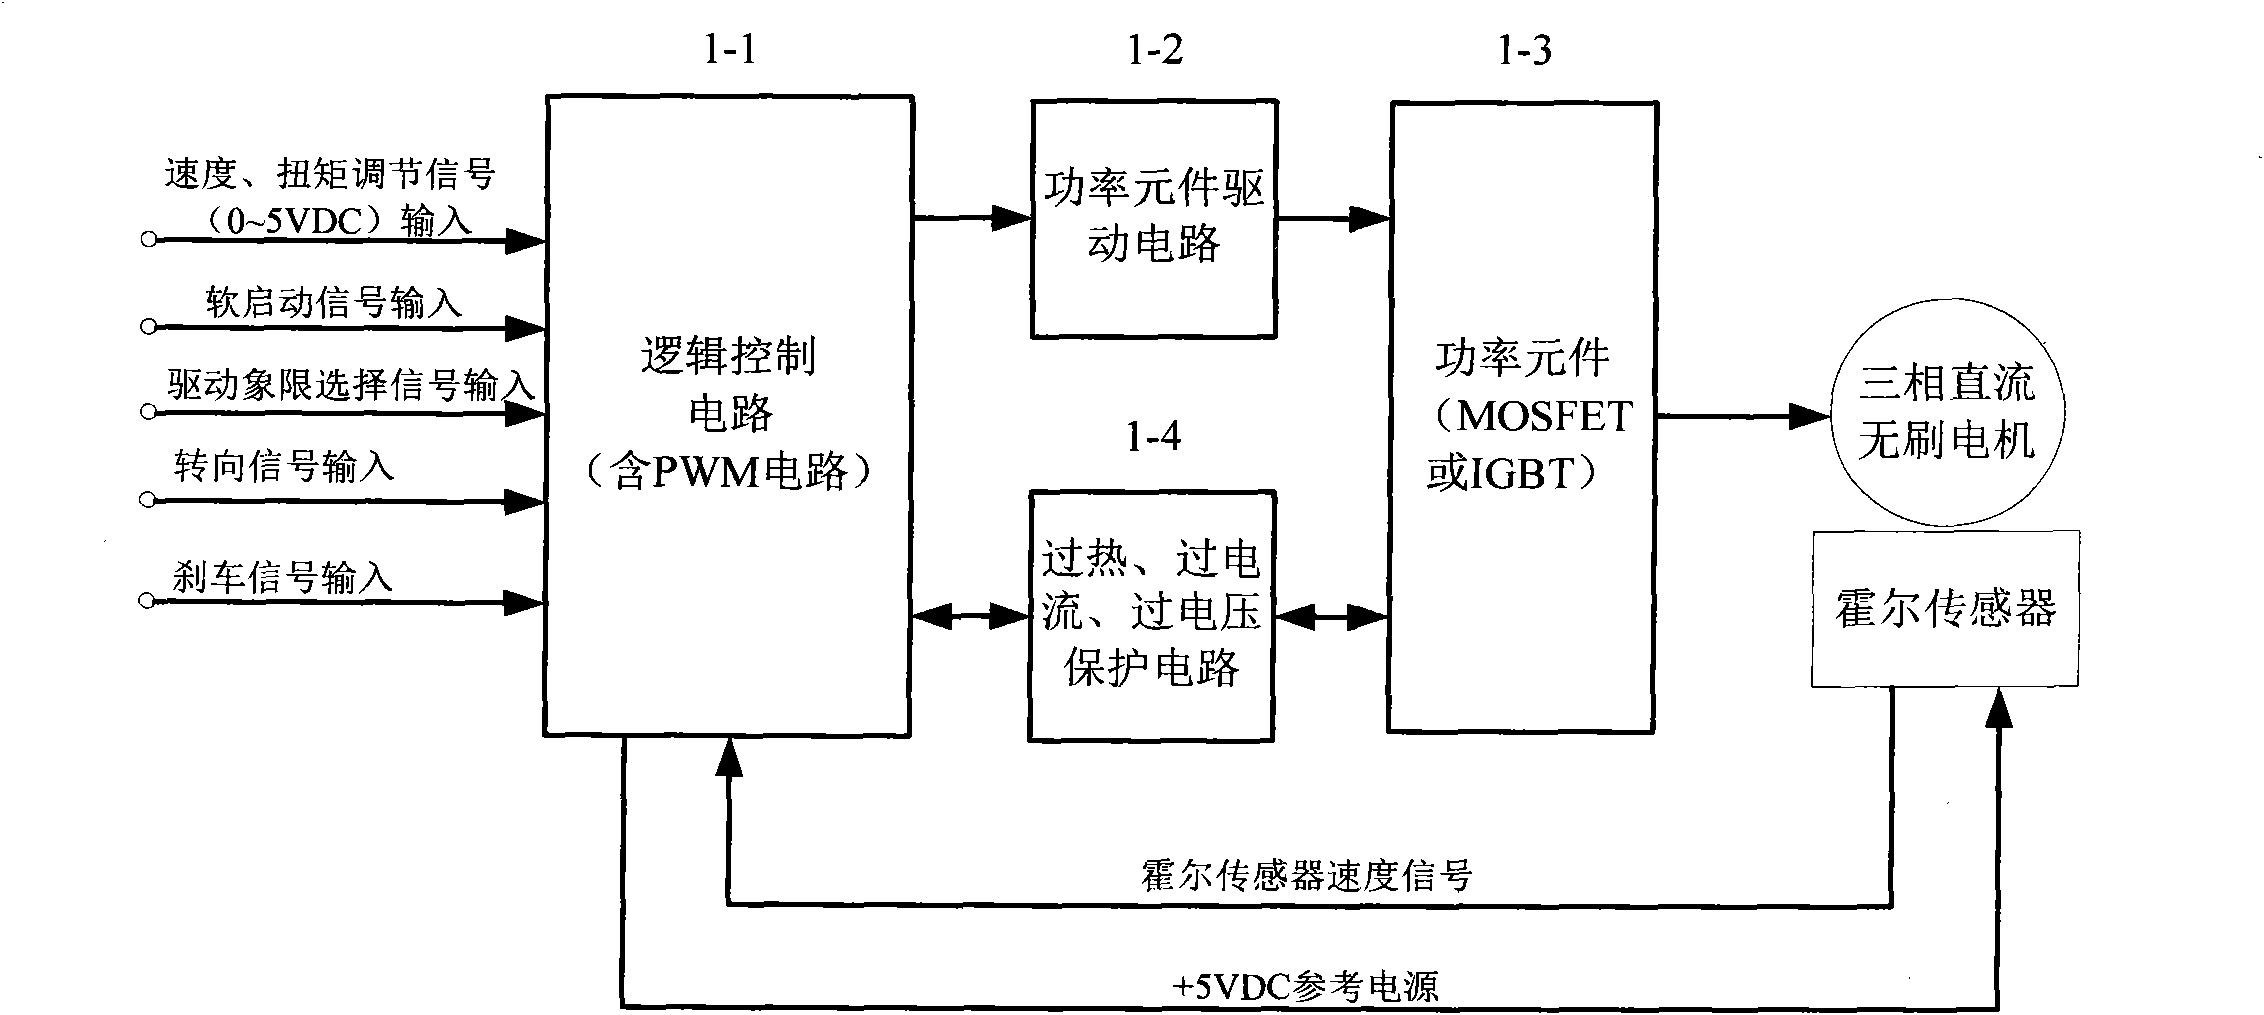 High-power three-phase brushless direct-current motor control module and packaging of control module